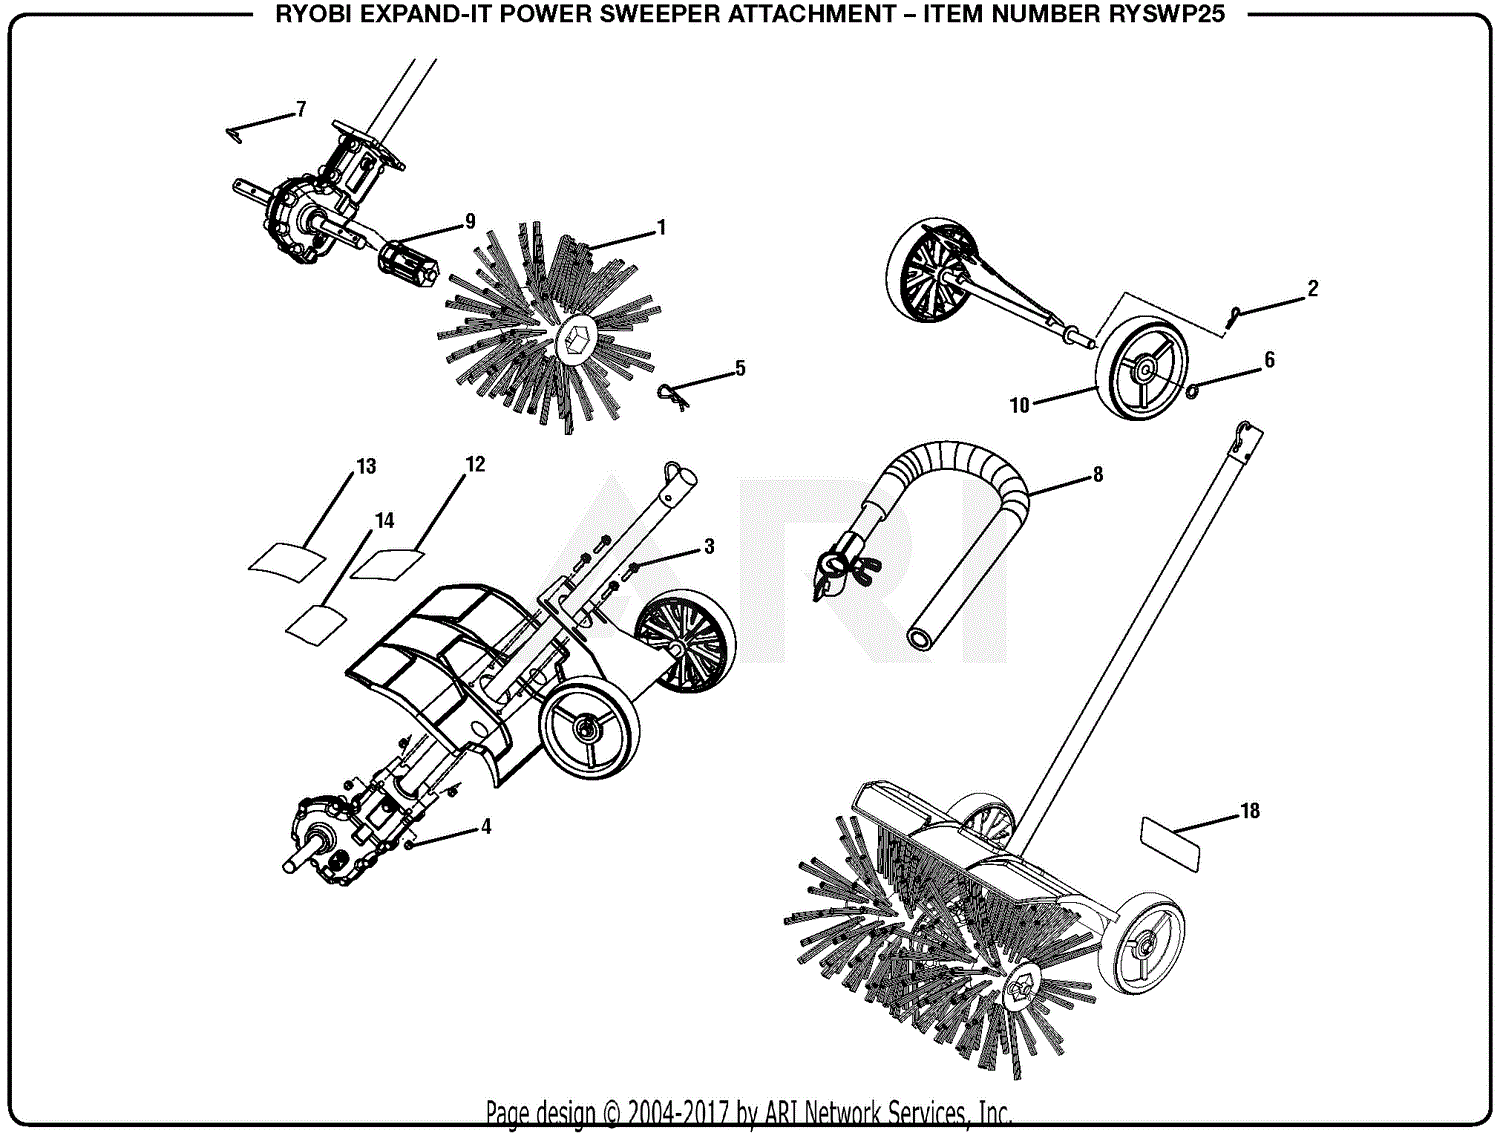 Med det samme At understrege let Homelite RYSWP25 Expand-It Power Sweeper Attachment Mfg. No. 090709001  12-5-17 (Rev:01) Parts Diagrams